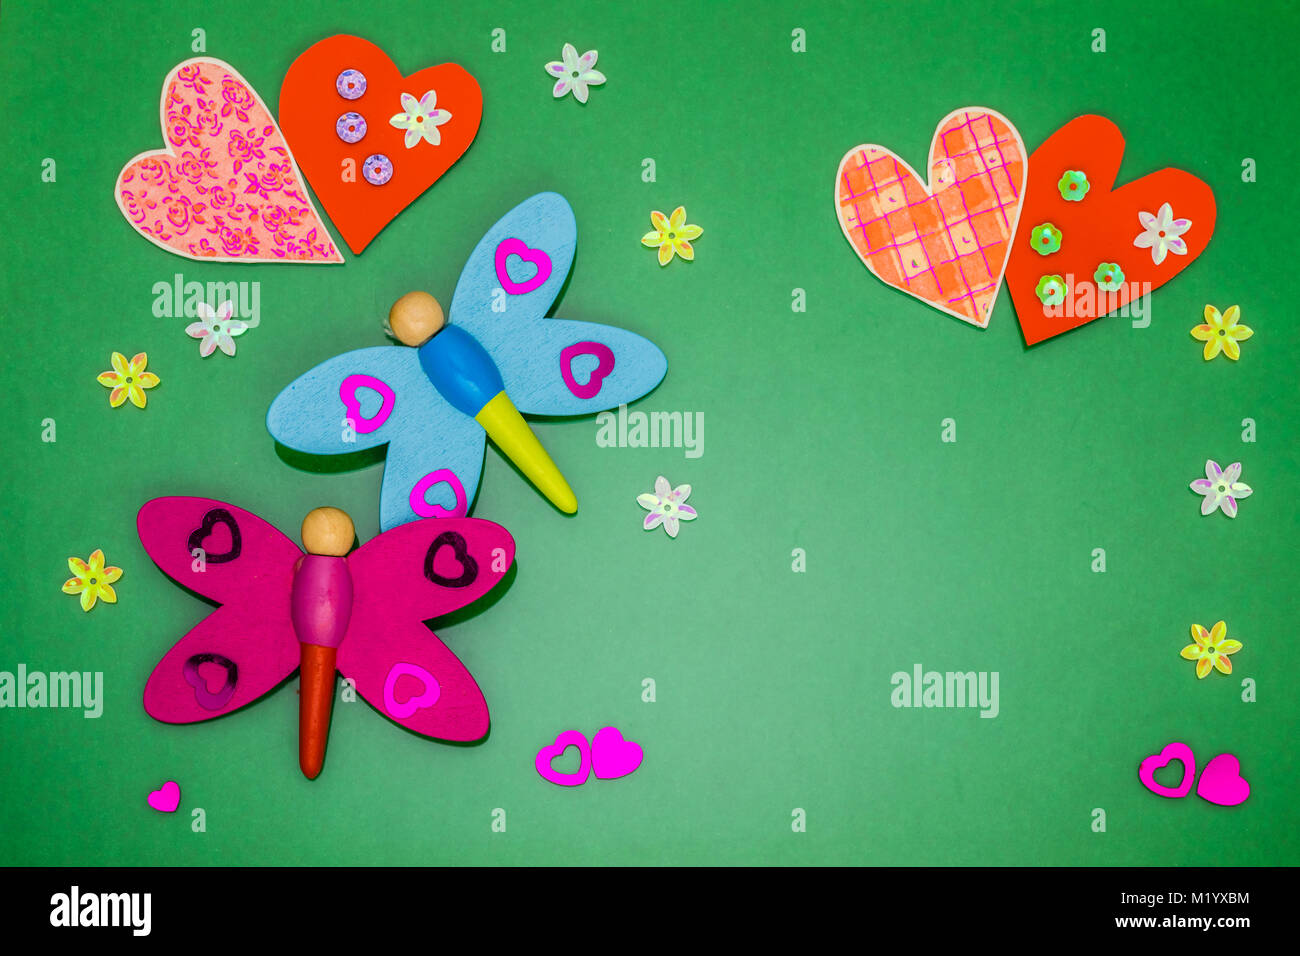 Greeting card with hearts and dragonflies on colored background Stock Photo